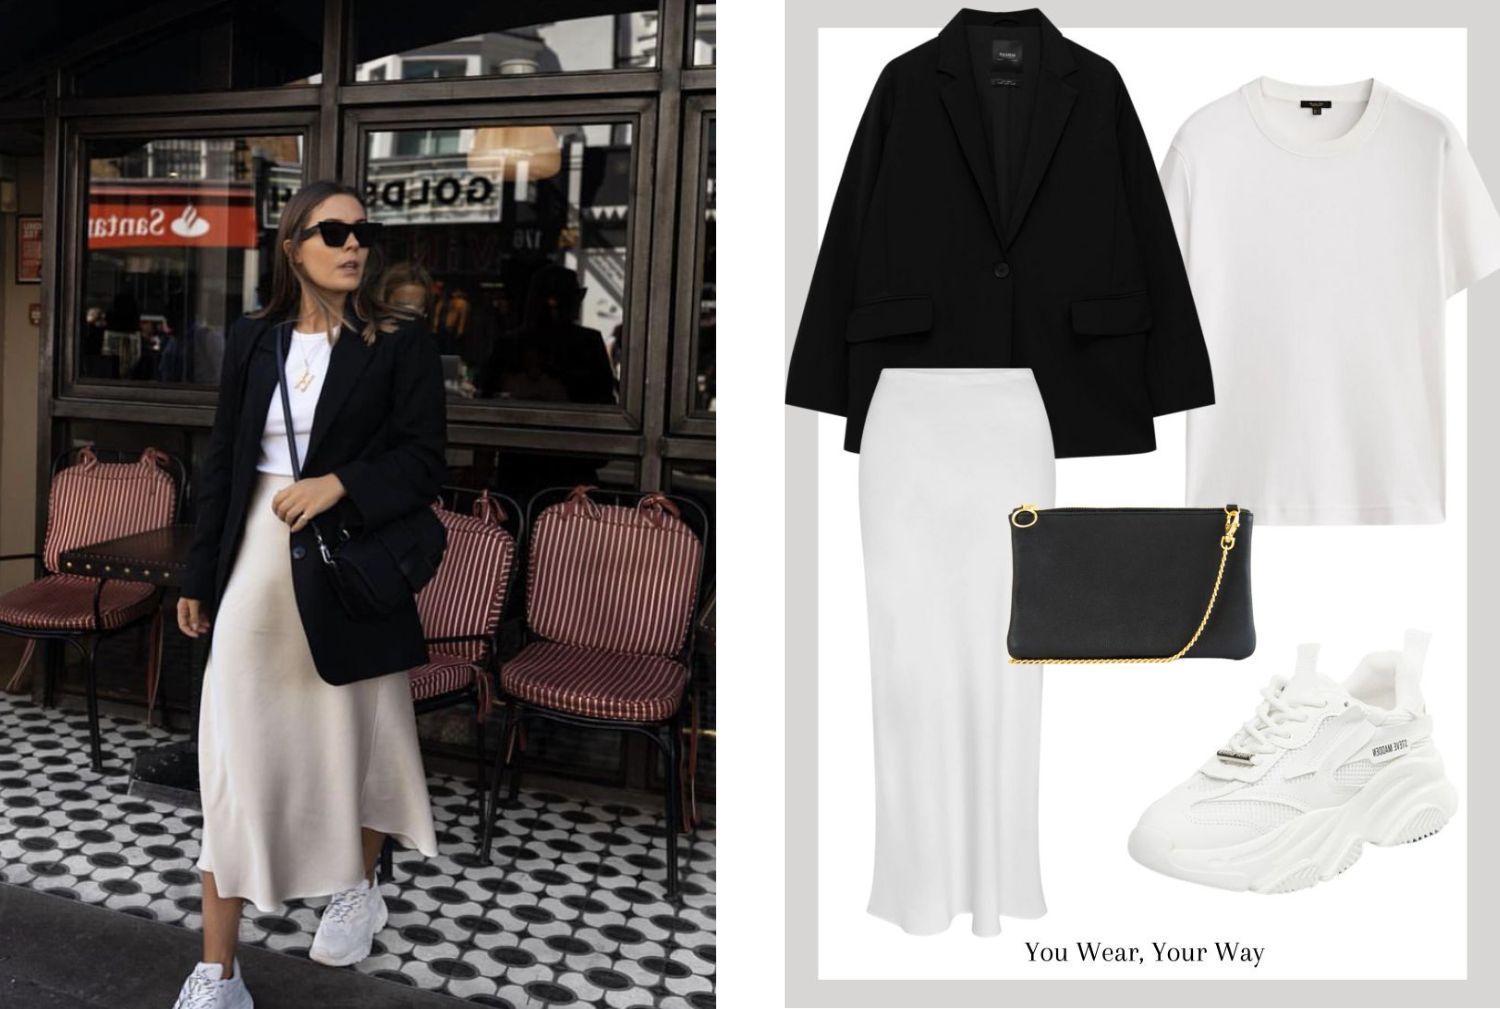 Winter White - Get the Look